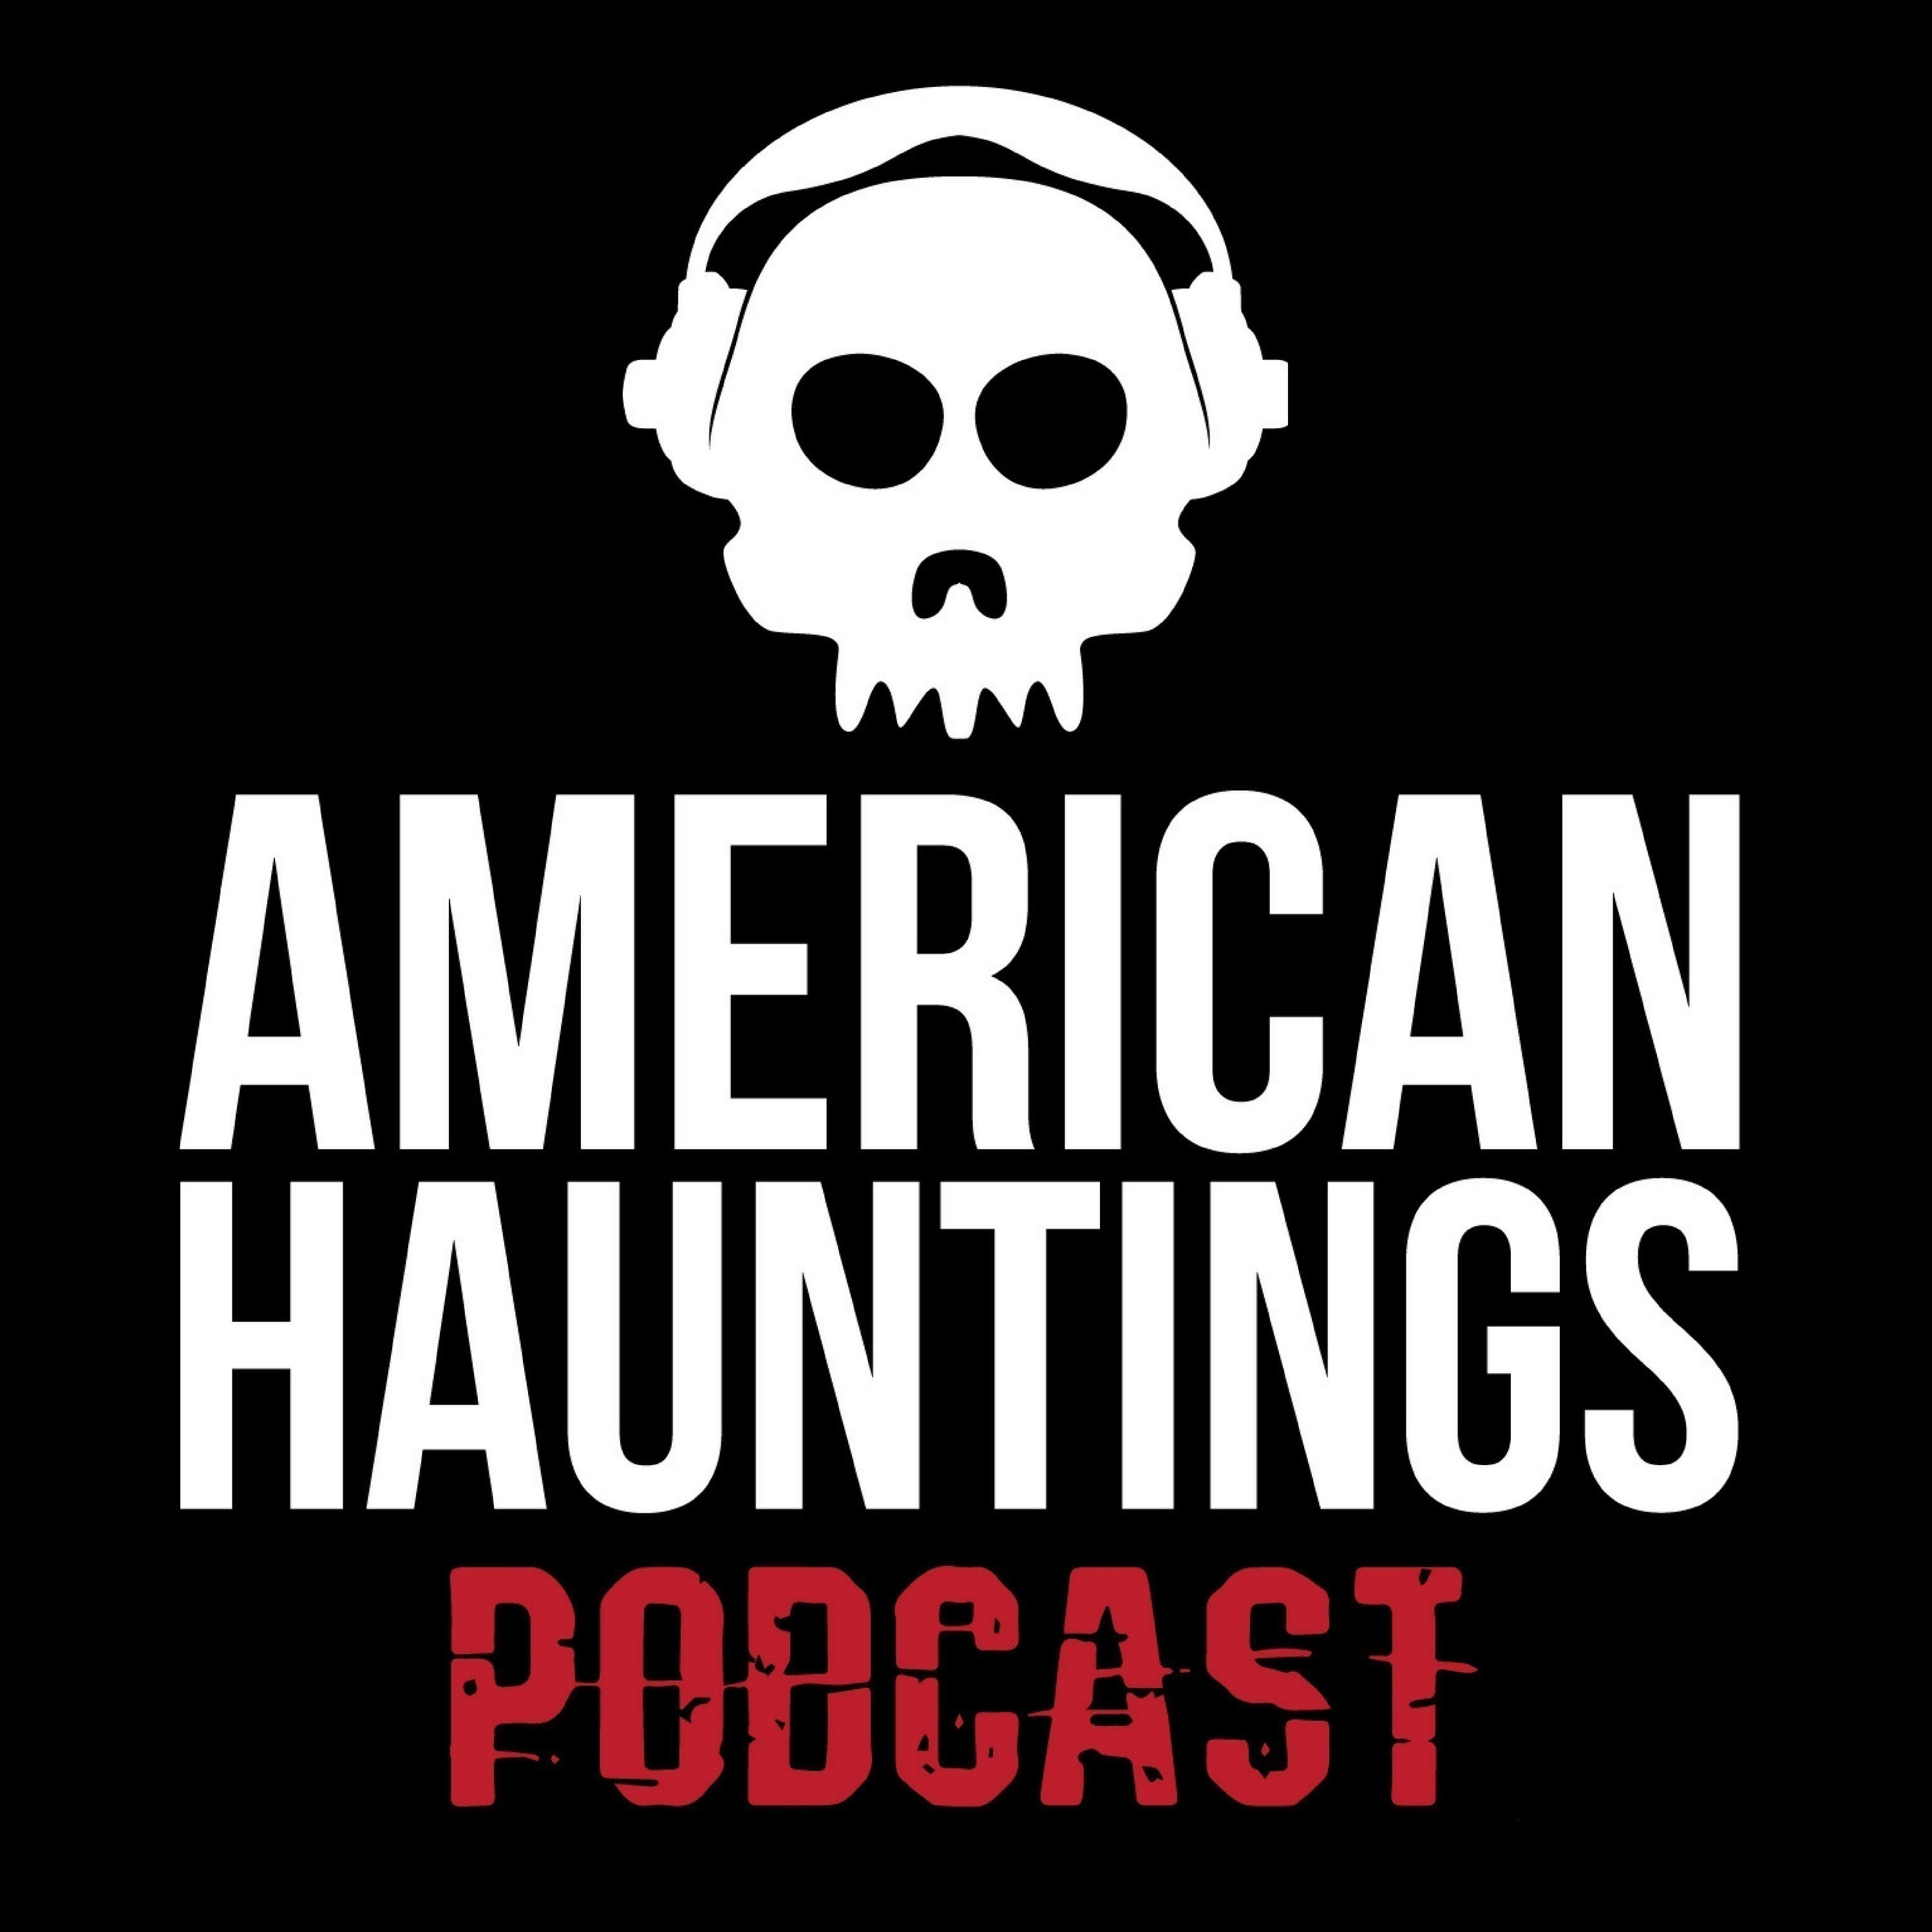 American Hauntings Podcast podcast show image